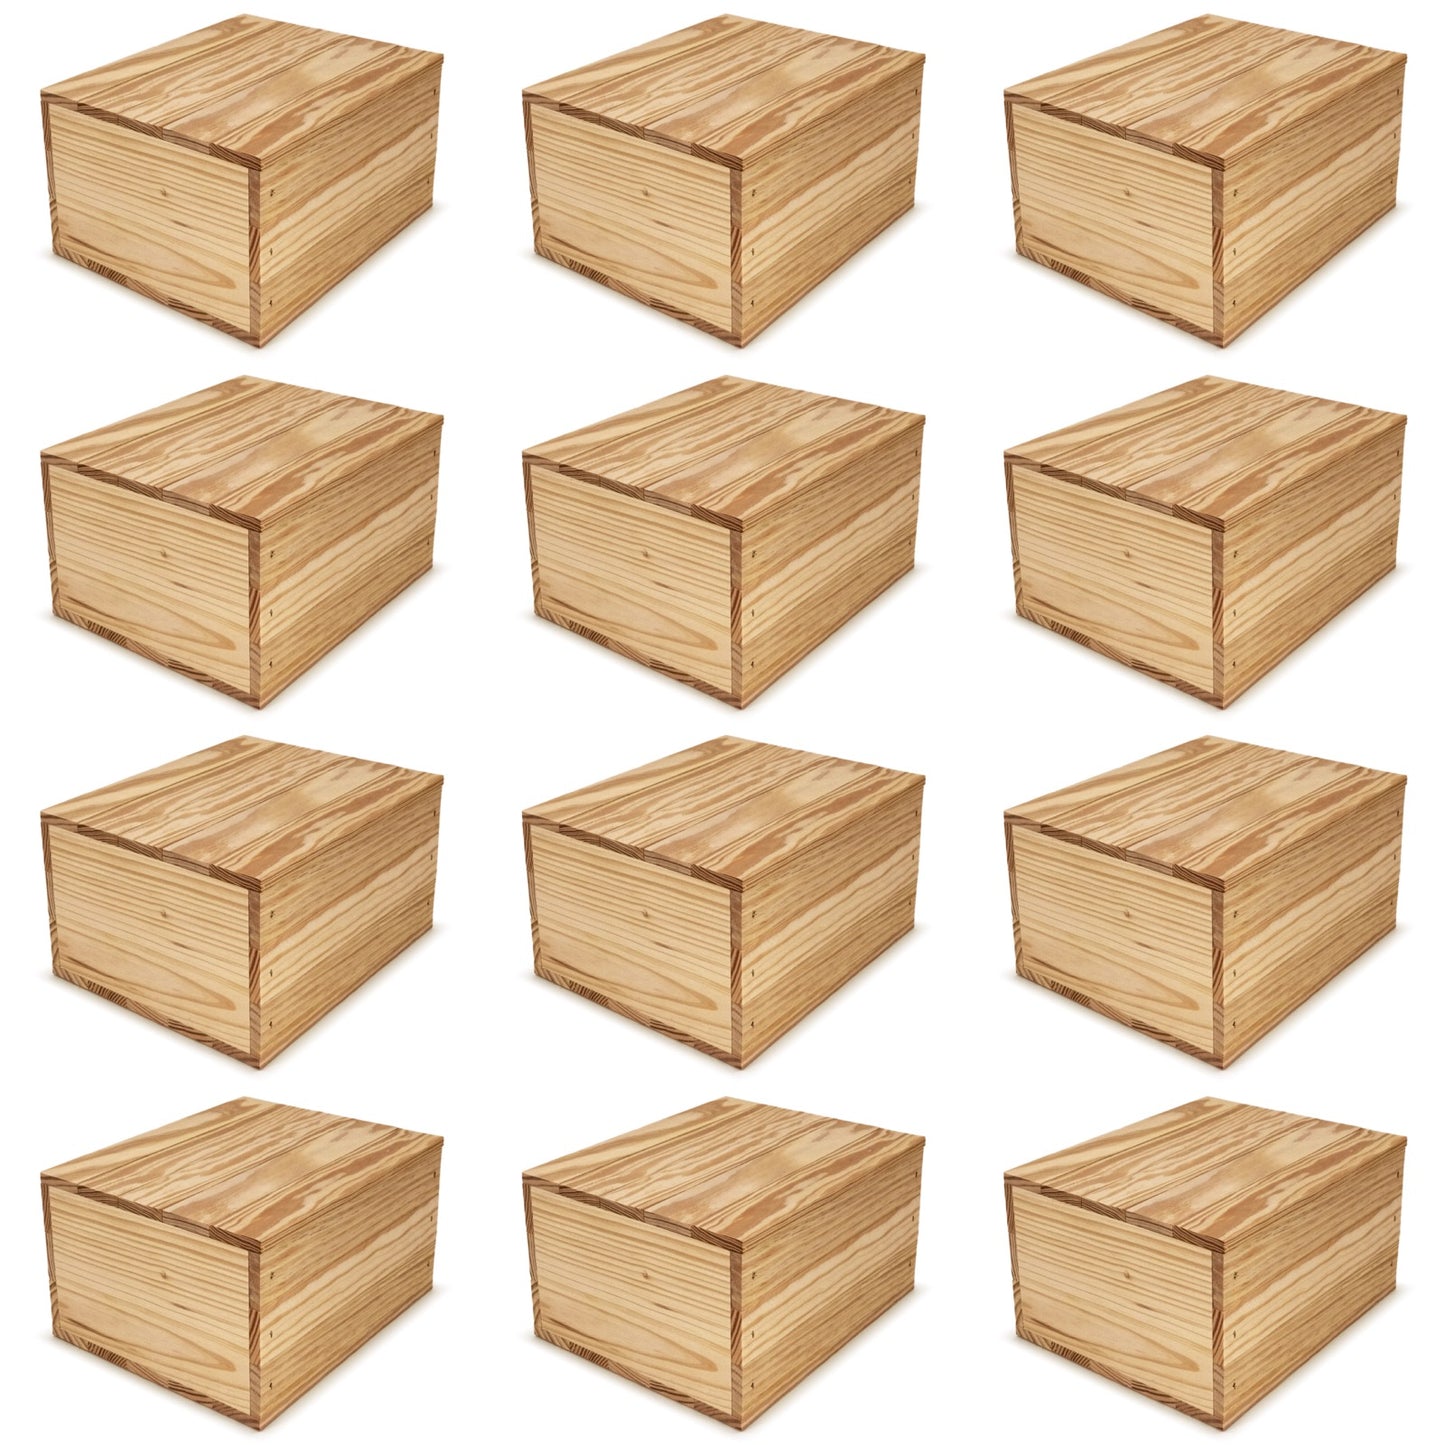 12 Small wooden crates with lid 9x8x5.25